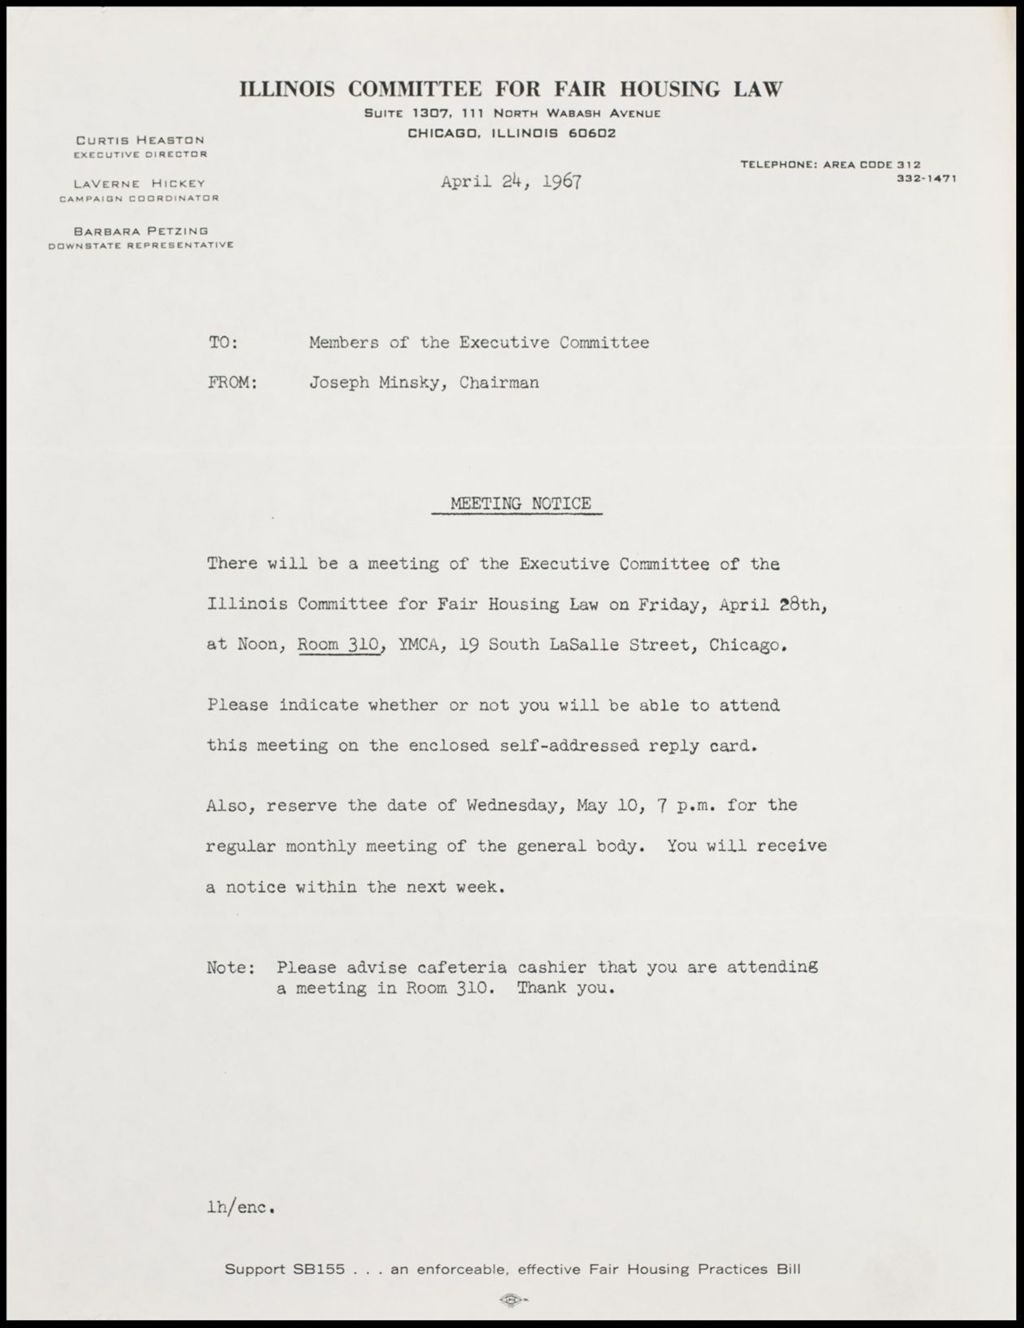 Research and Planning Fair Housing Law, 1966 (Folder IV-1123)